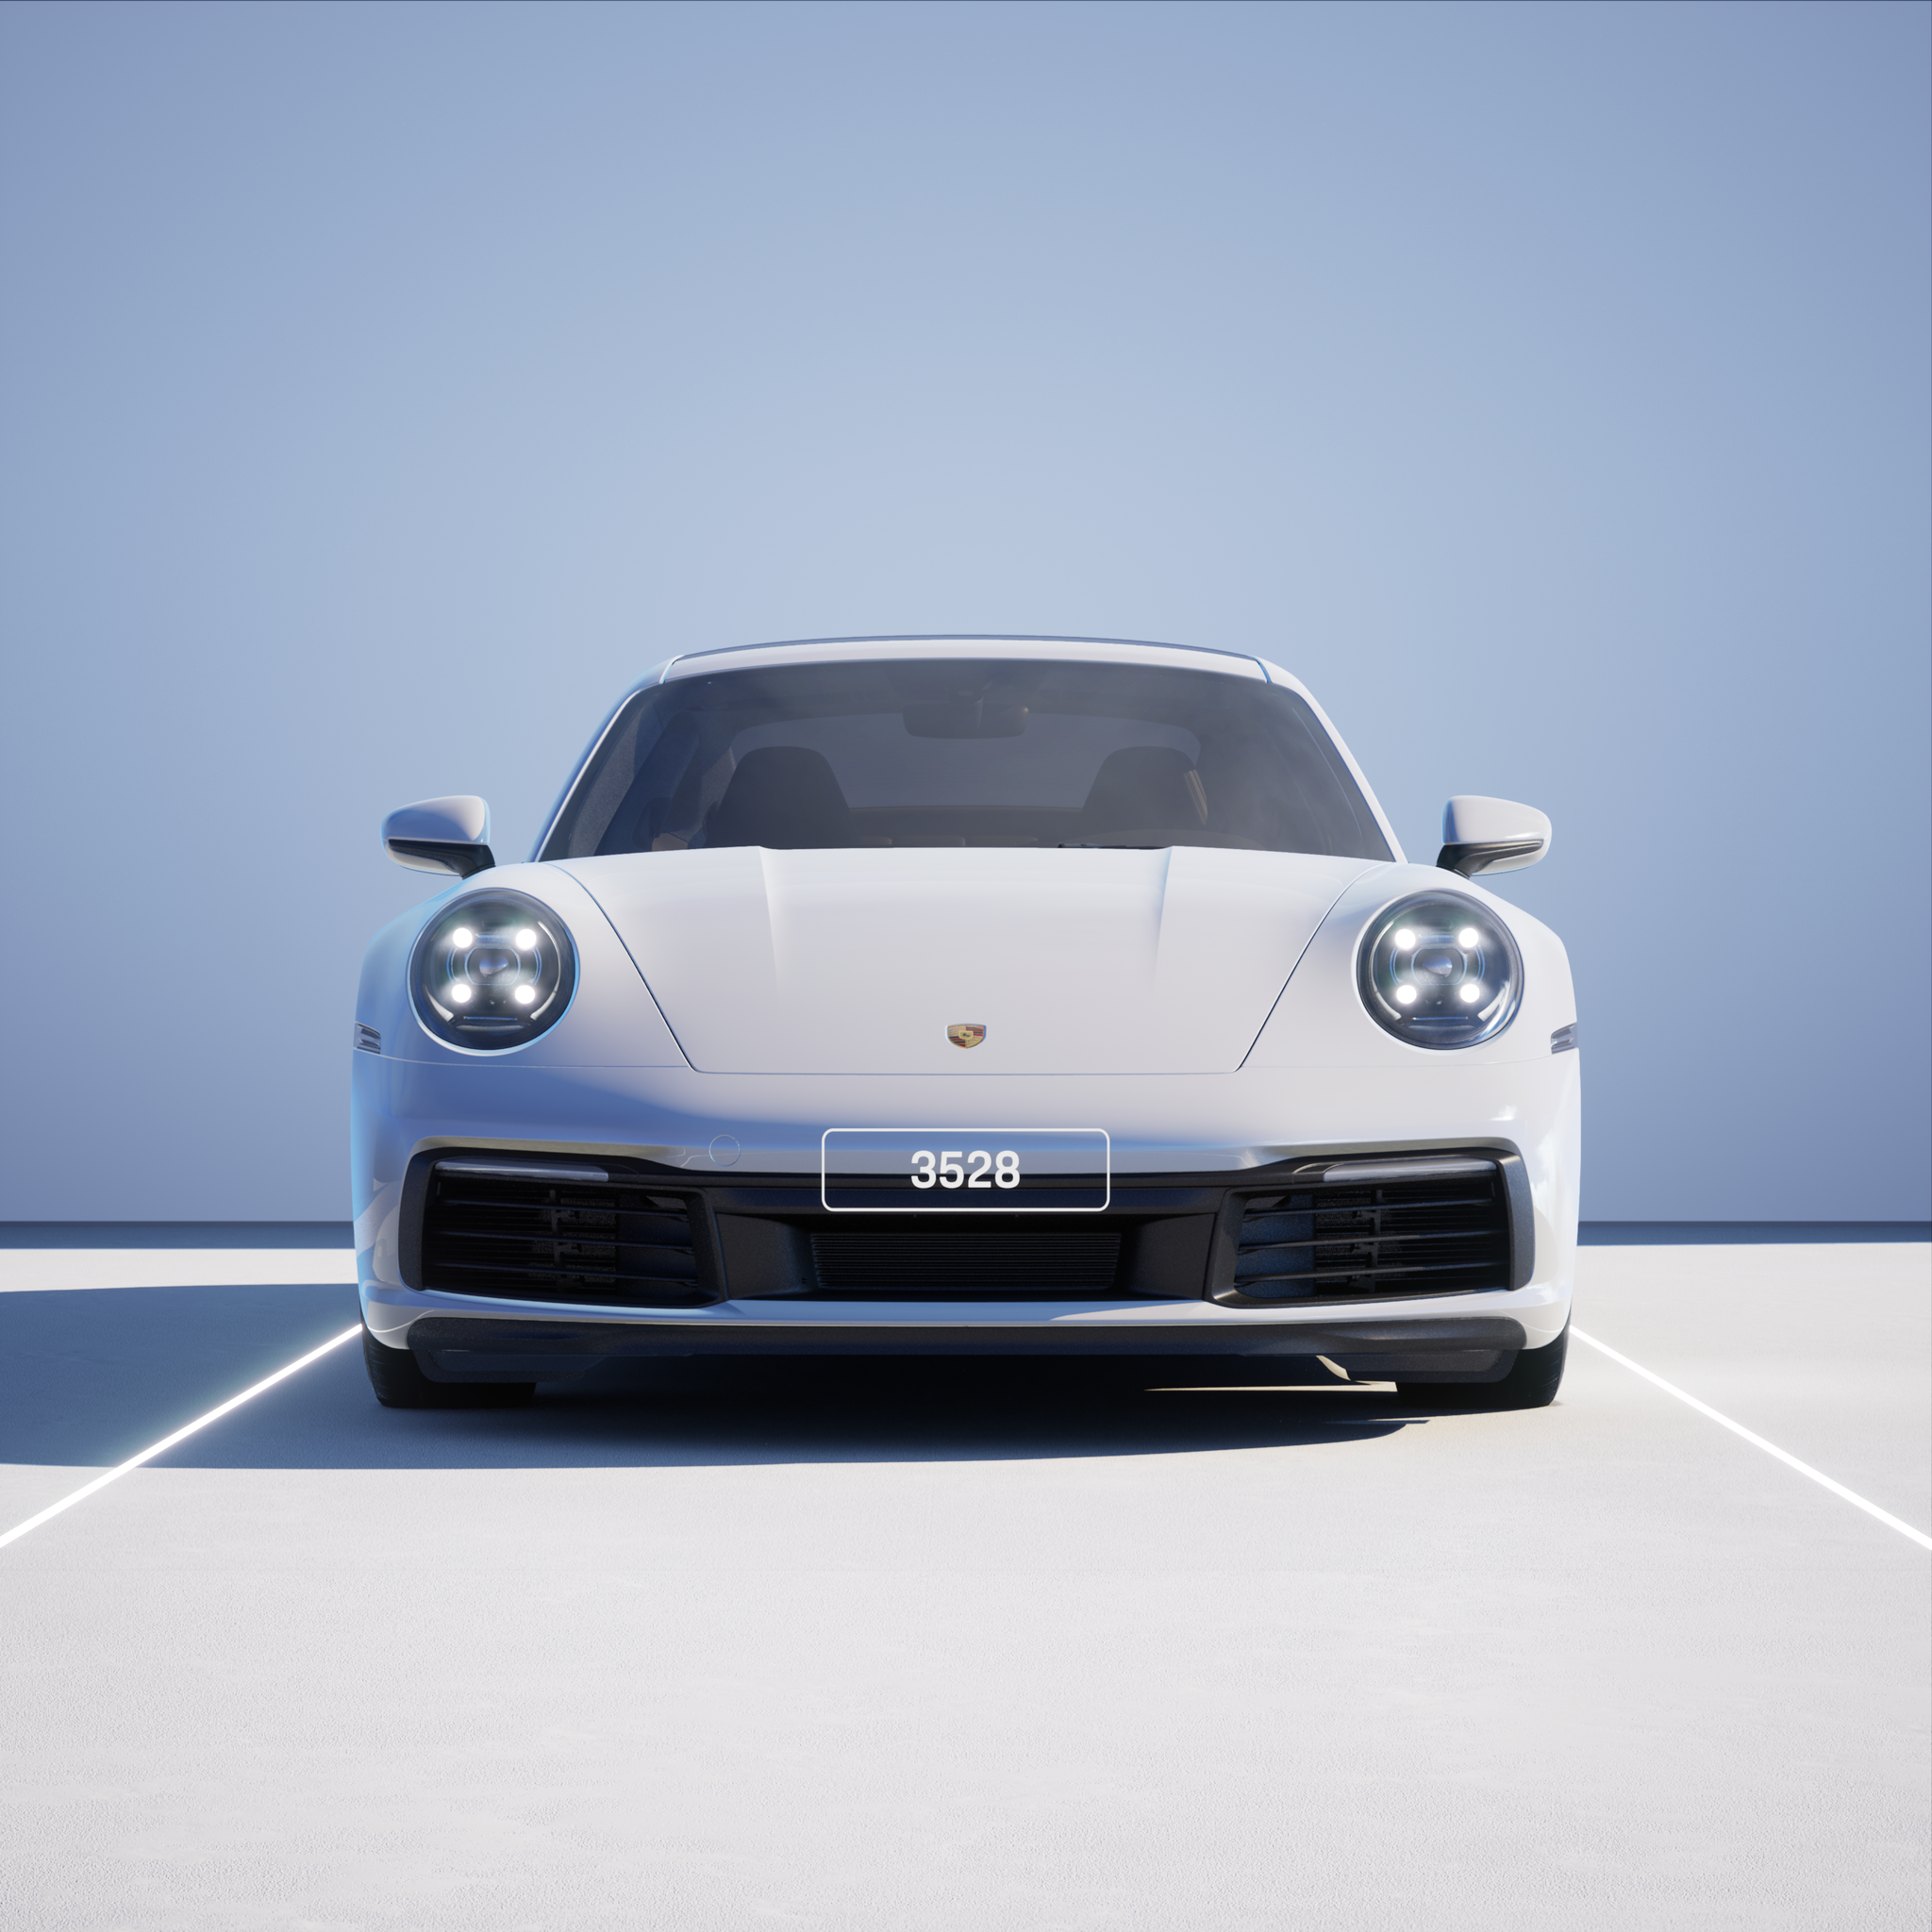 The PORSCHΞ 911 3528 image in phase